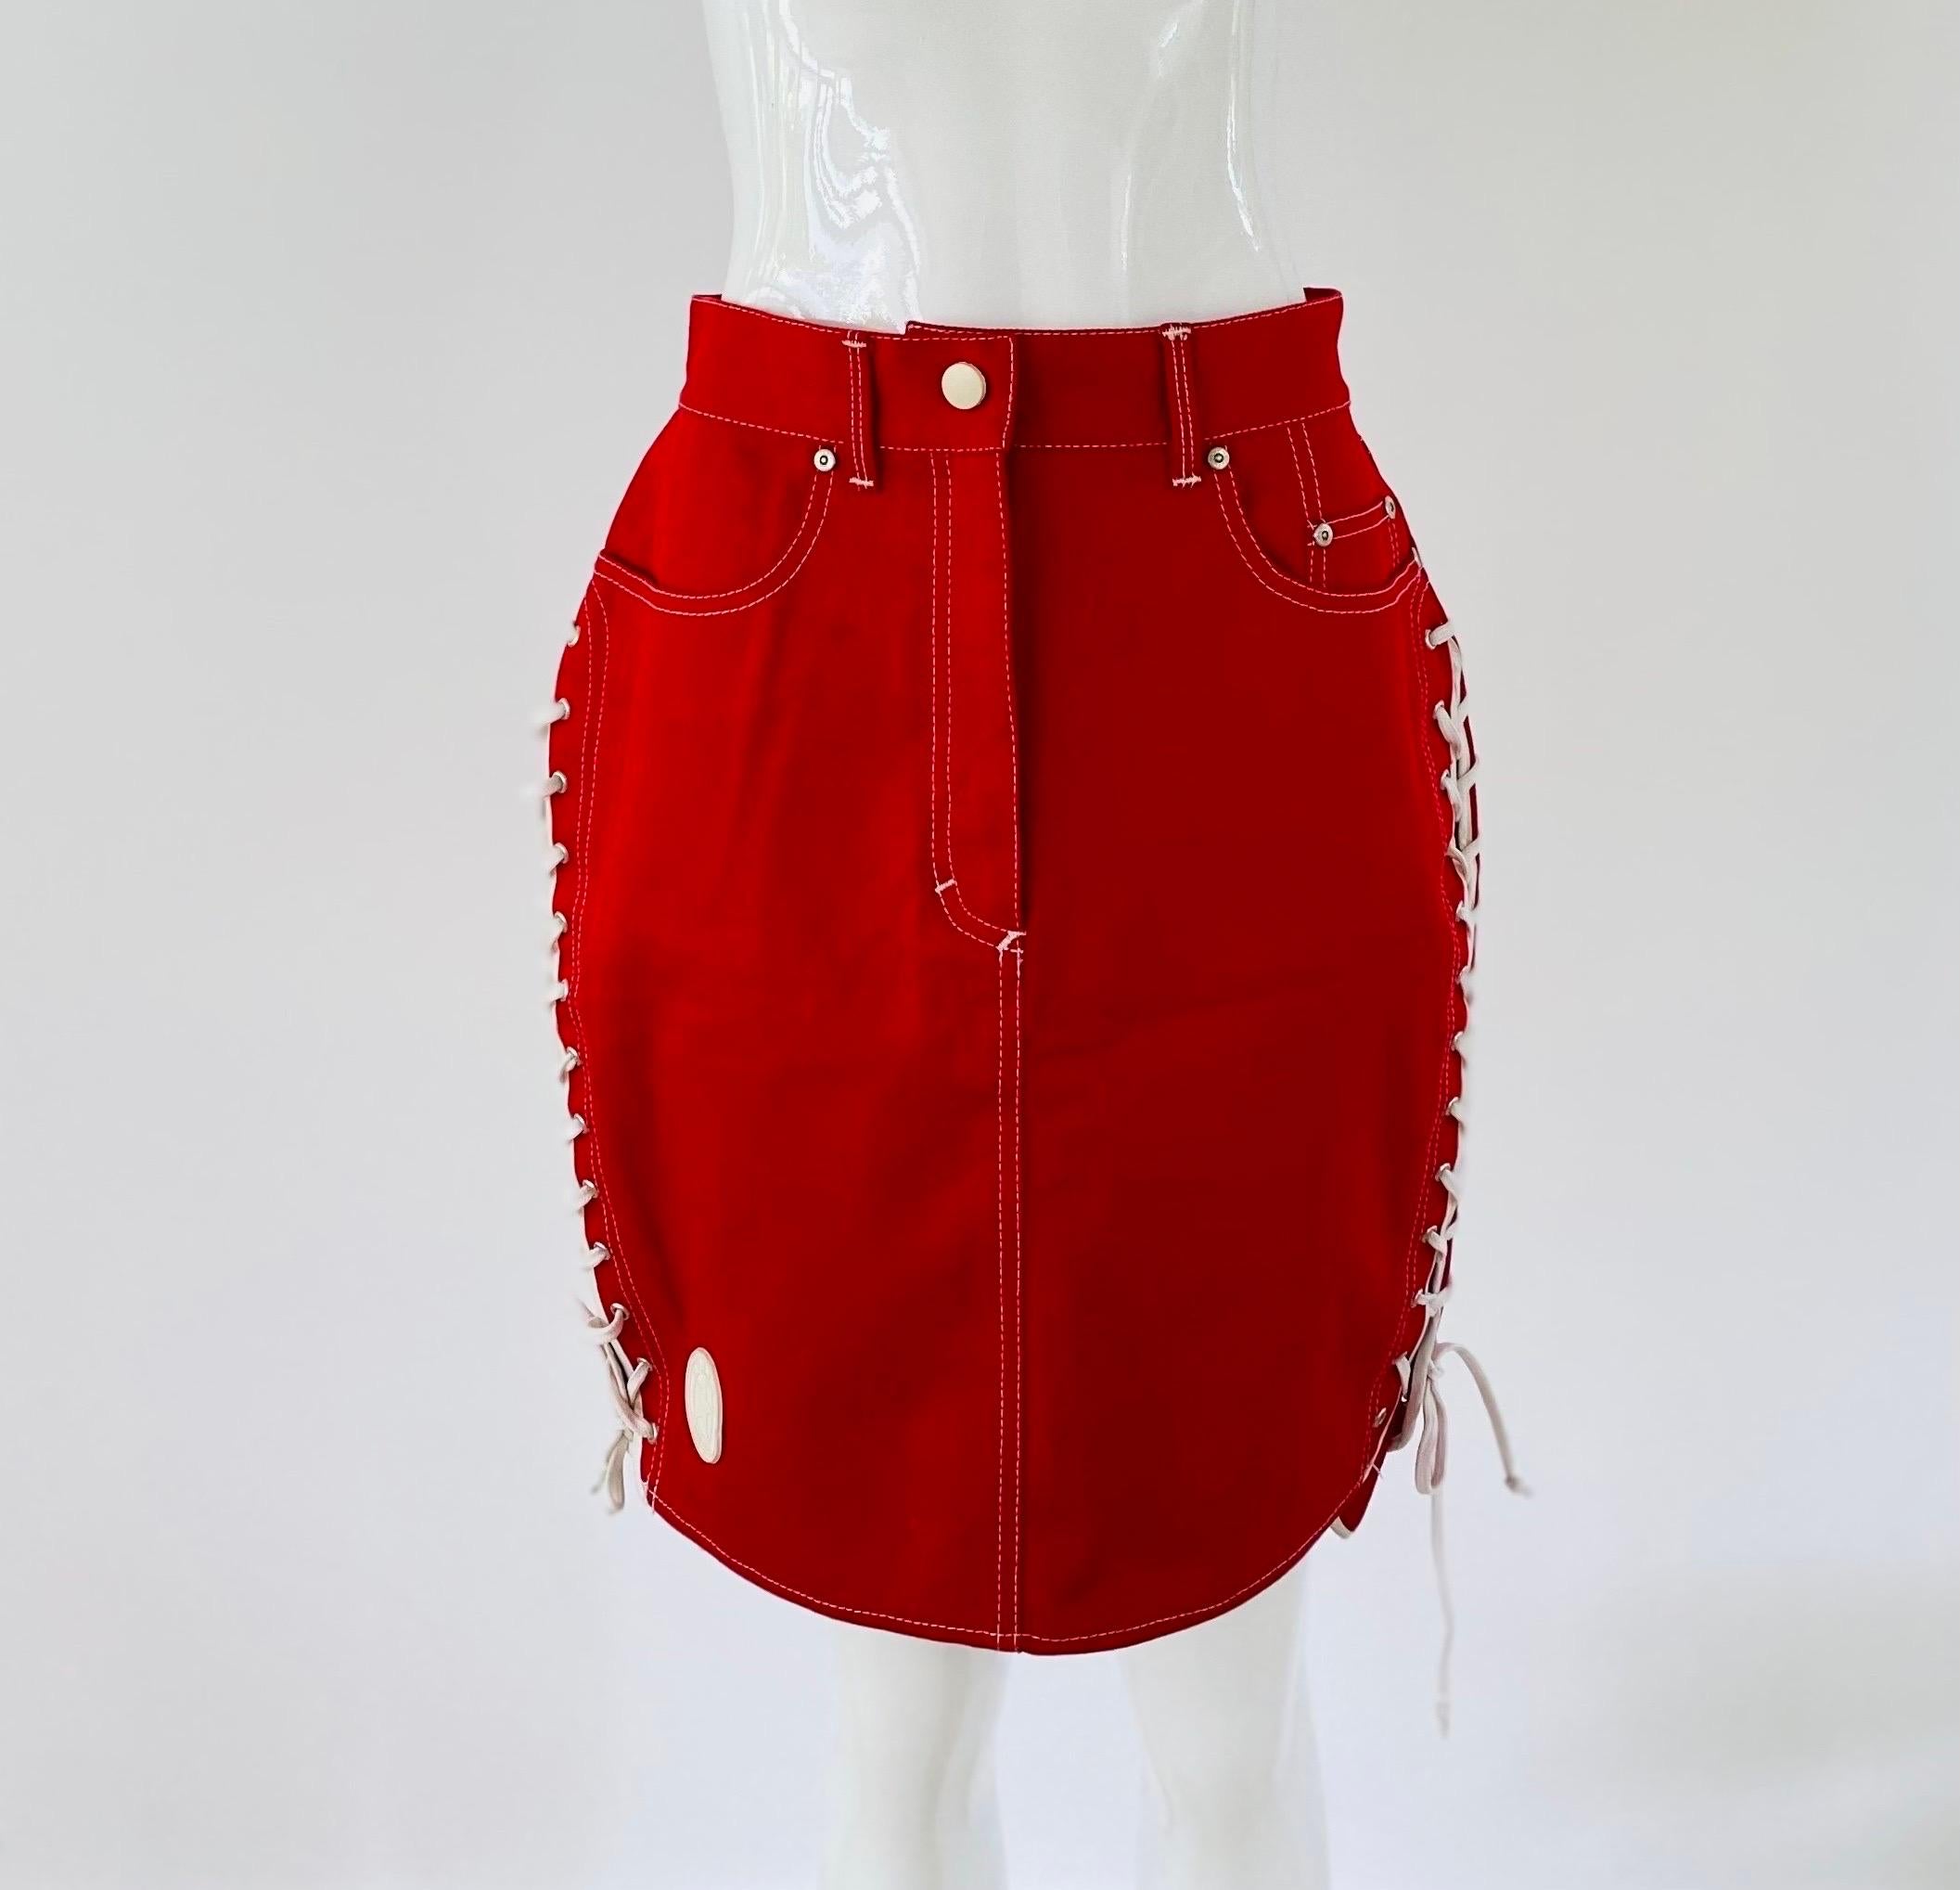 1980s Gaultier Junior above the knee red skirt with white stitches. It resembles a pair of converse with a star patch on the front bottom right corner and laced up shoelaces on each side. Functional pockets on the front and back. White snap button